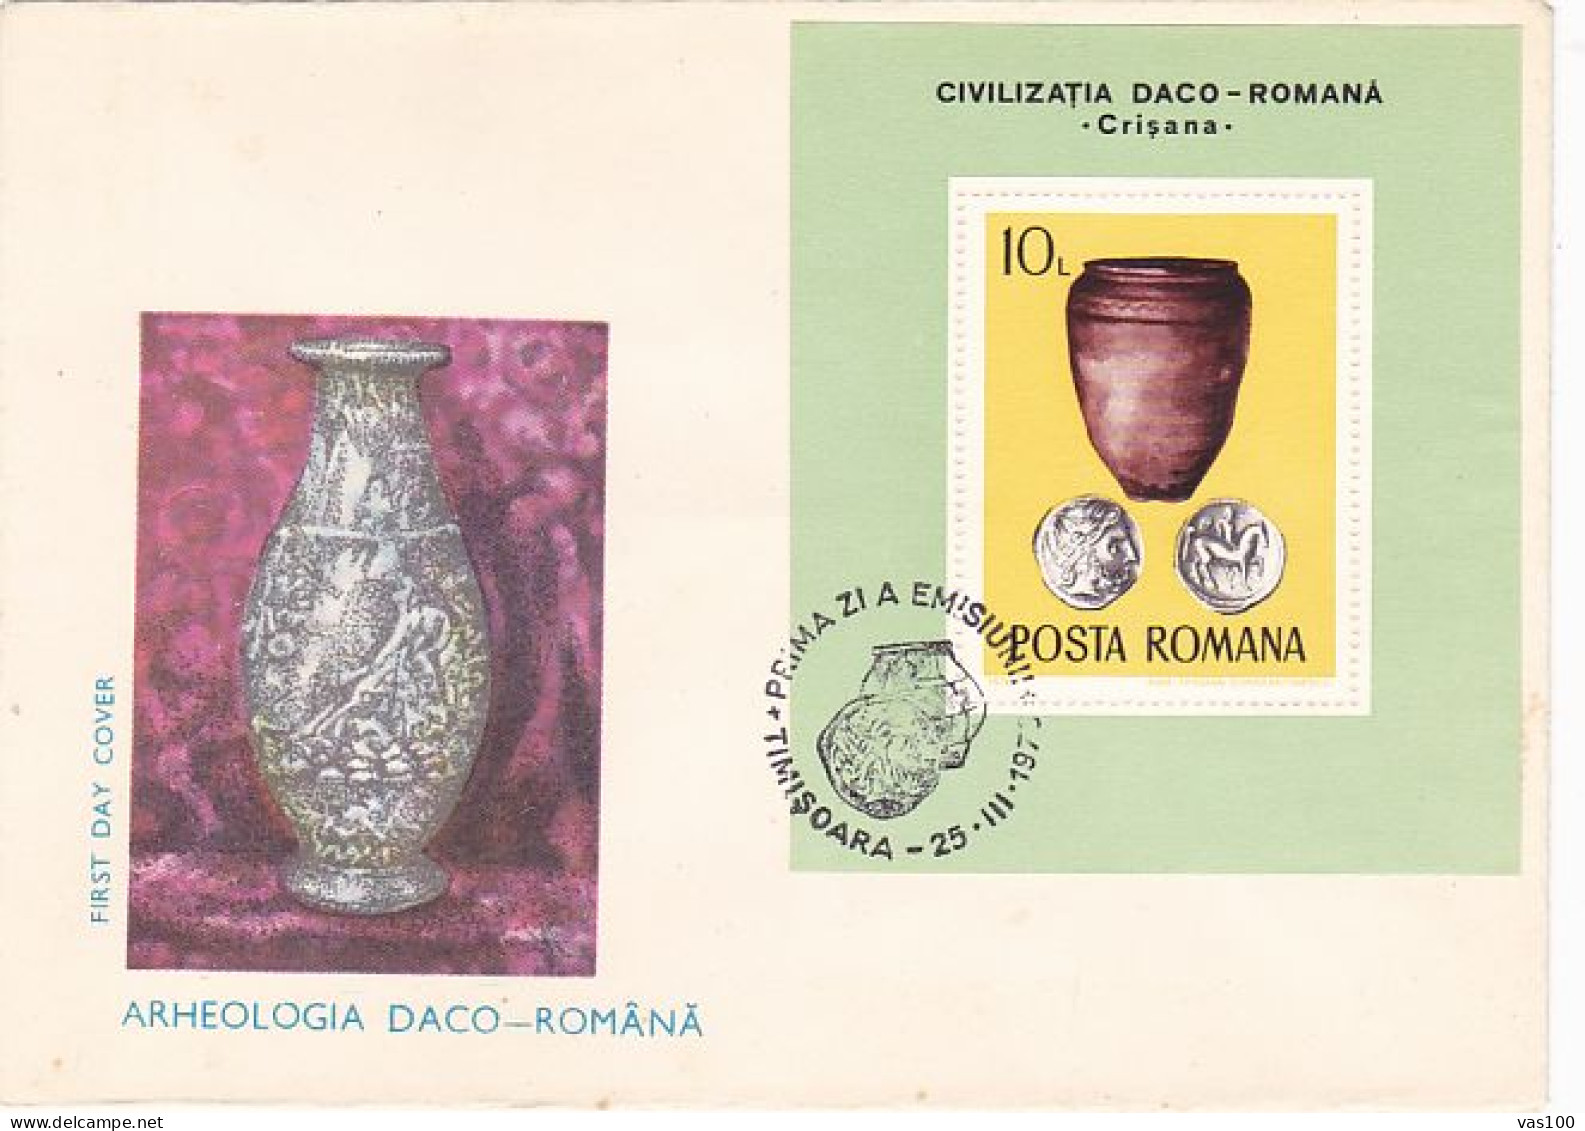 ARCHAEOLOGY, ANCIENT DACIAN AND ROMAN RELICS, COVER FDC, 1976, ROMANIA - Archaeology